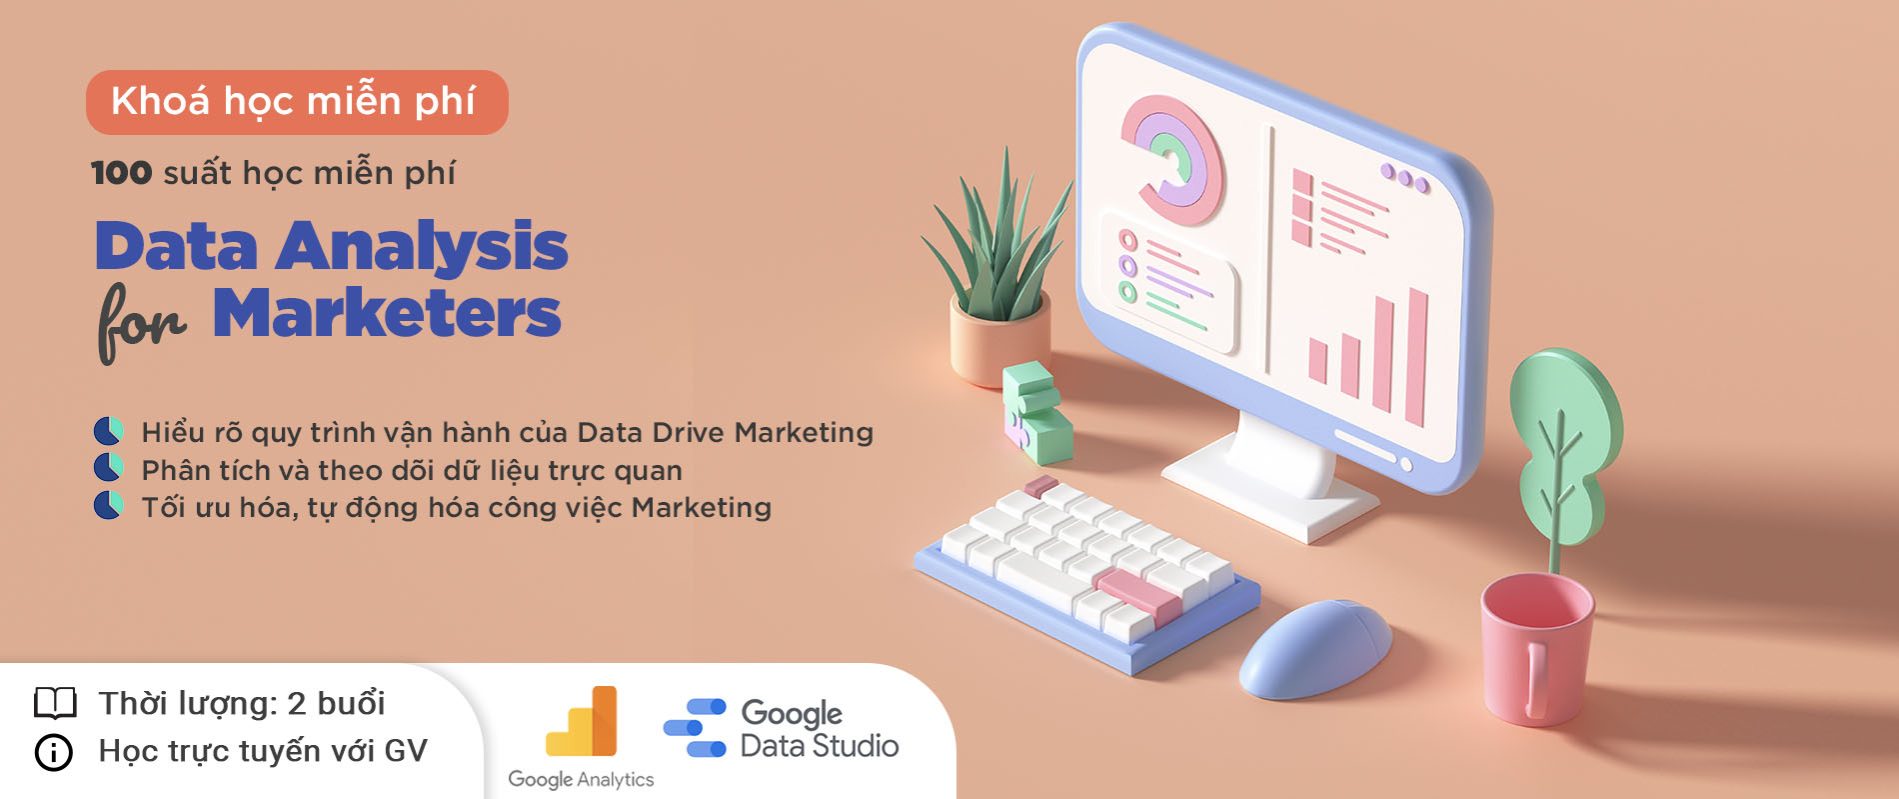 Data Analysis for Marketers - Free mini coure